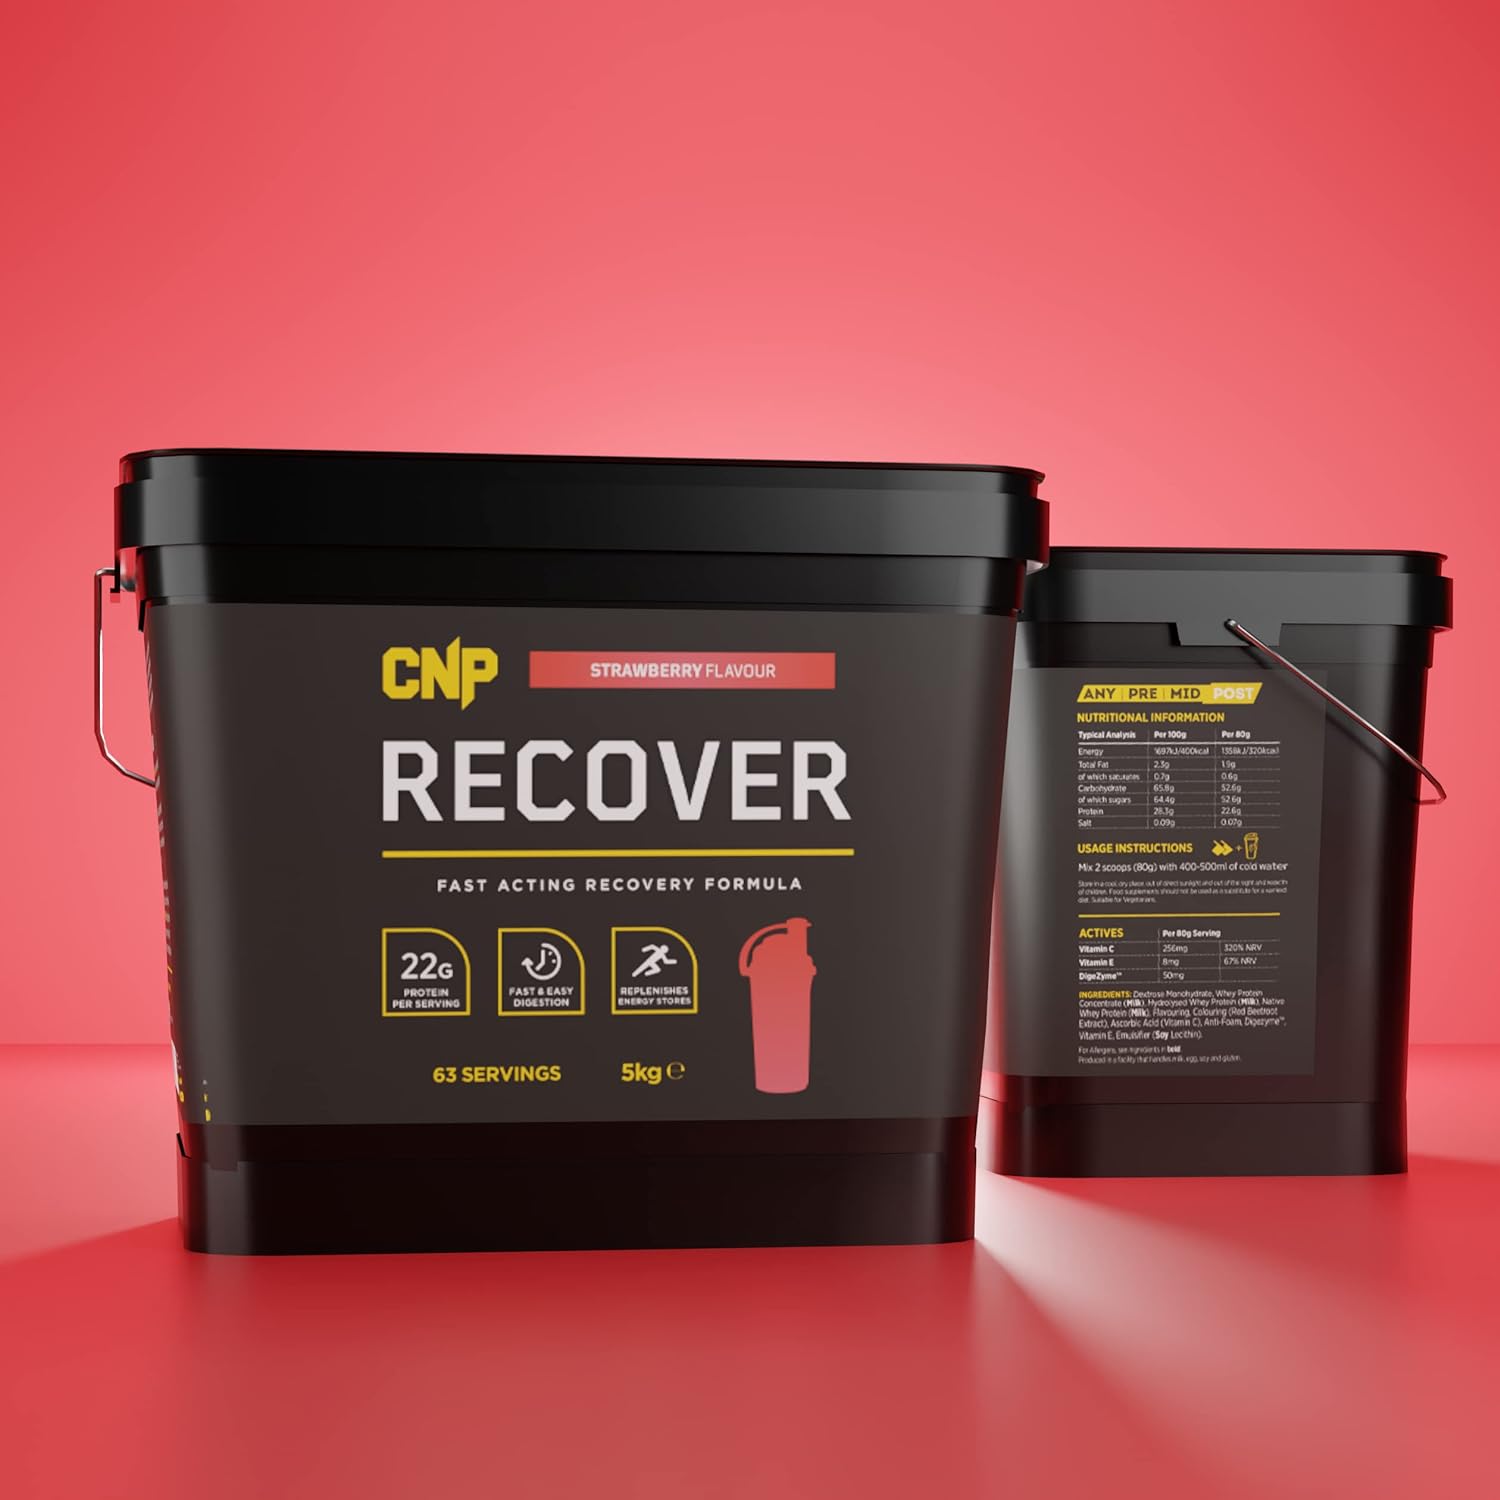 CNP Professional Recover, 5kg & 1.2kg Fast Acting Post Exercise Recove